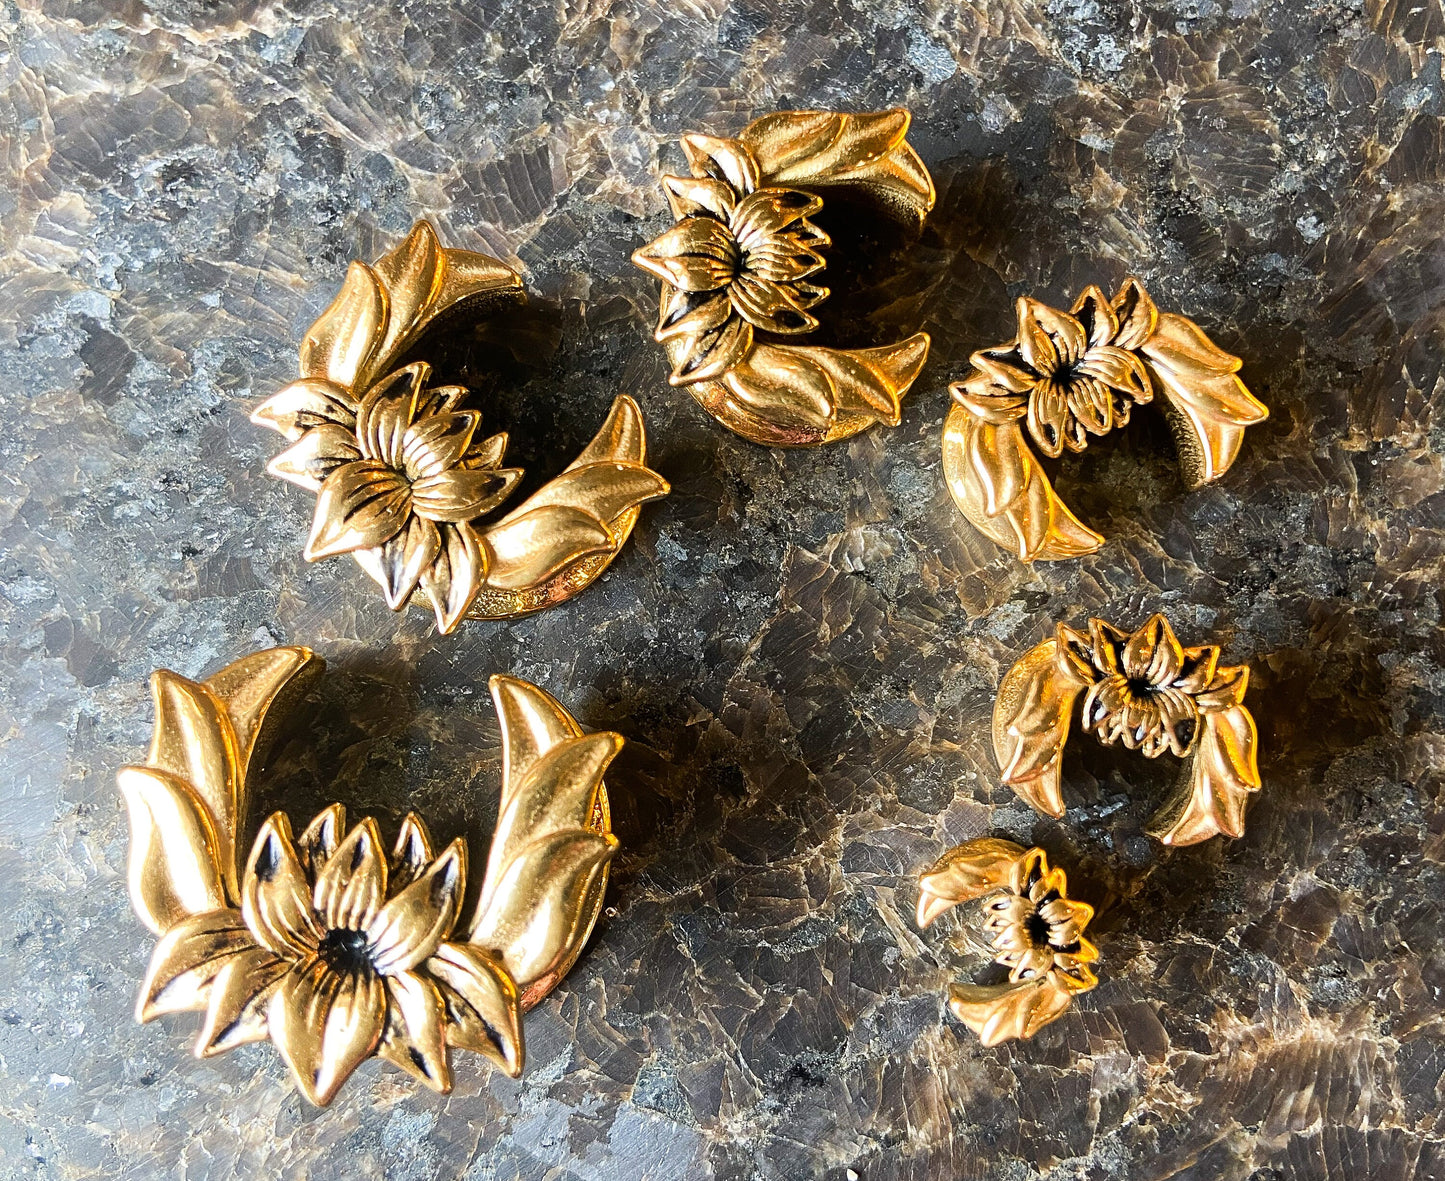 PAIR of Unique Gold Plated Lotus Flower Ear Spreader Surgical Steel Tunnels/Plugs - Gauges 0g (8mm) through 3/4" (19mm) available!